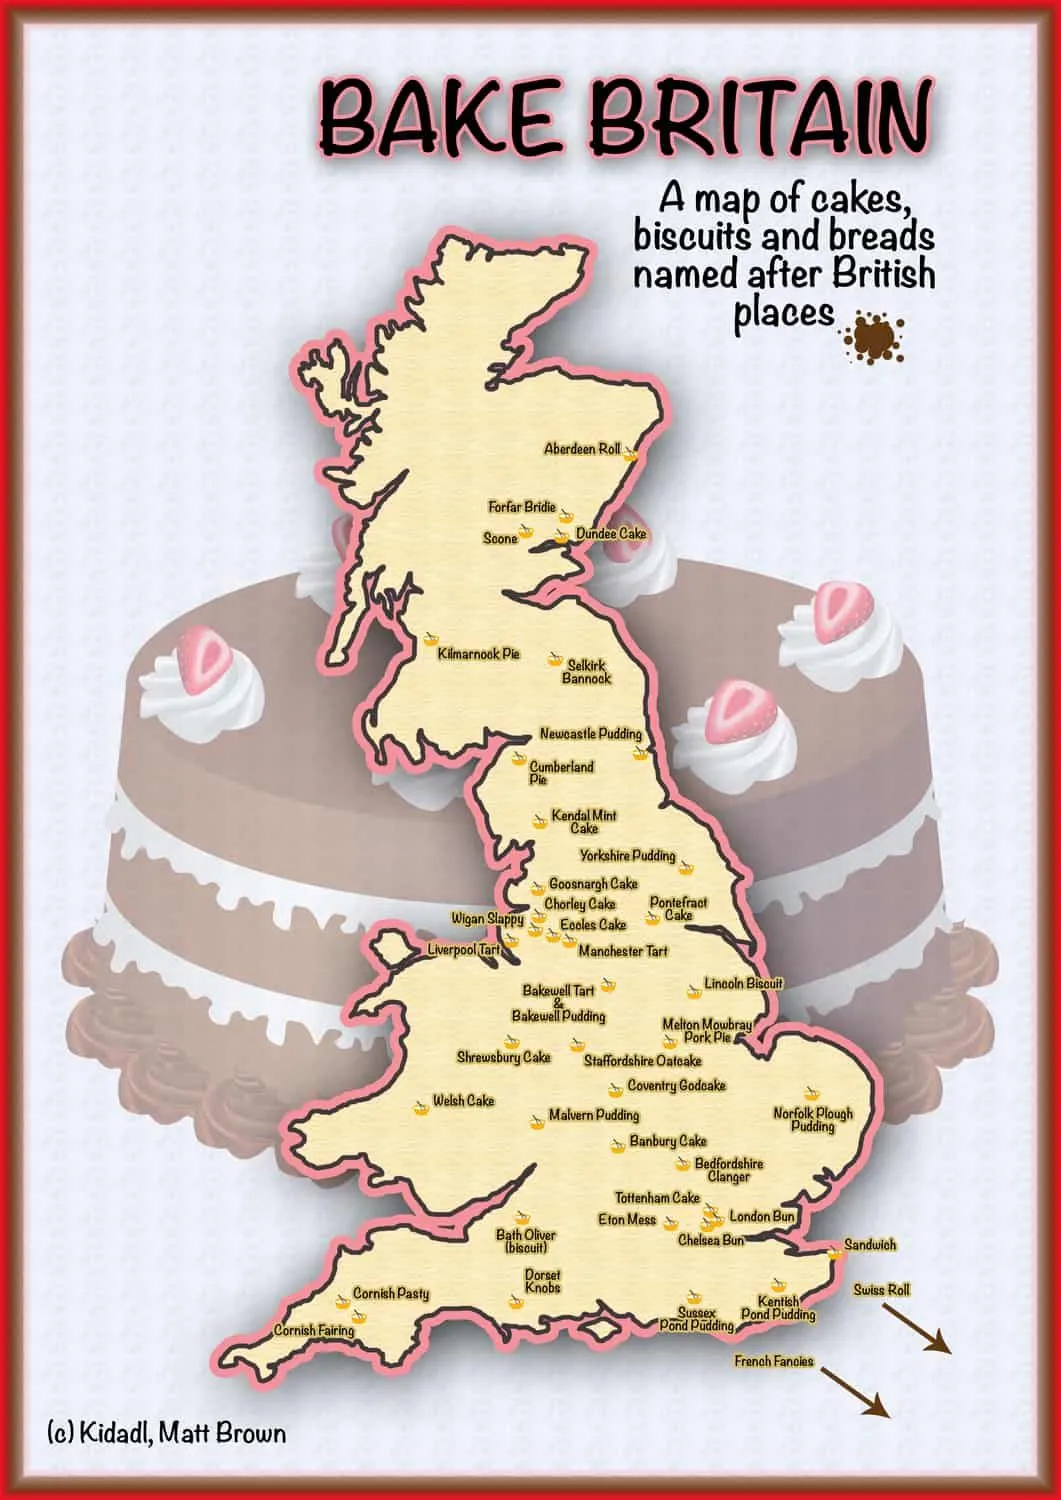 Kidadl's Bake Britain map of cakes and biscuits named after British places.